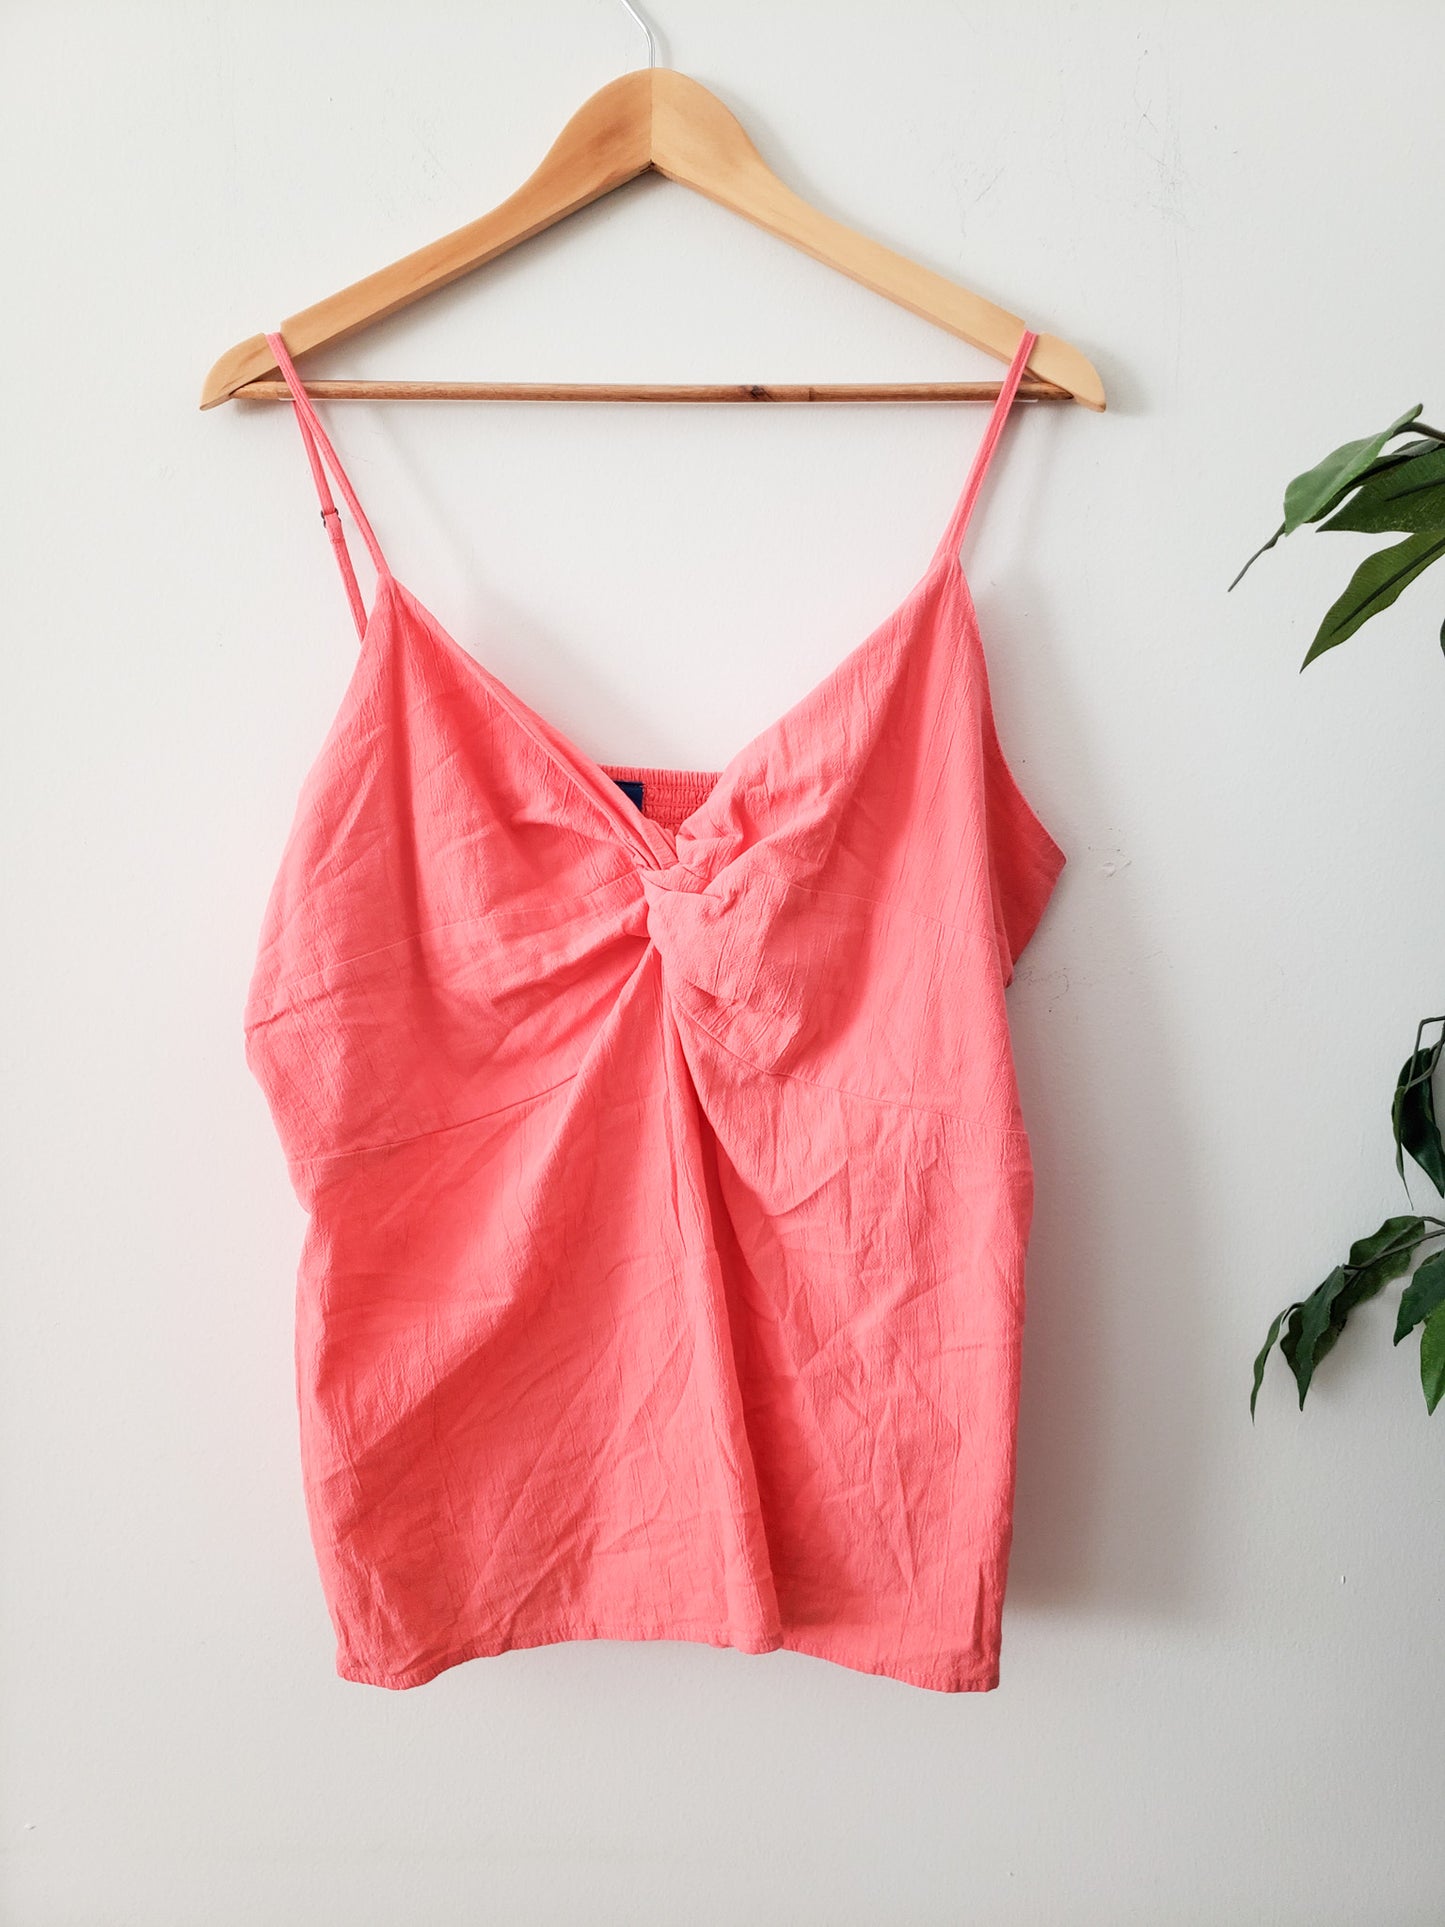 OLD NAVY CORAL PINK TWIST FRONT TOP SIZE XL